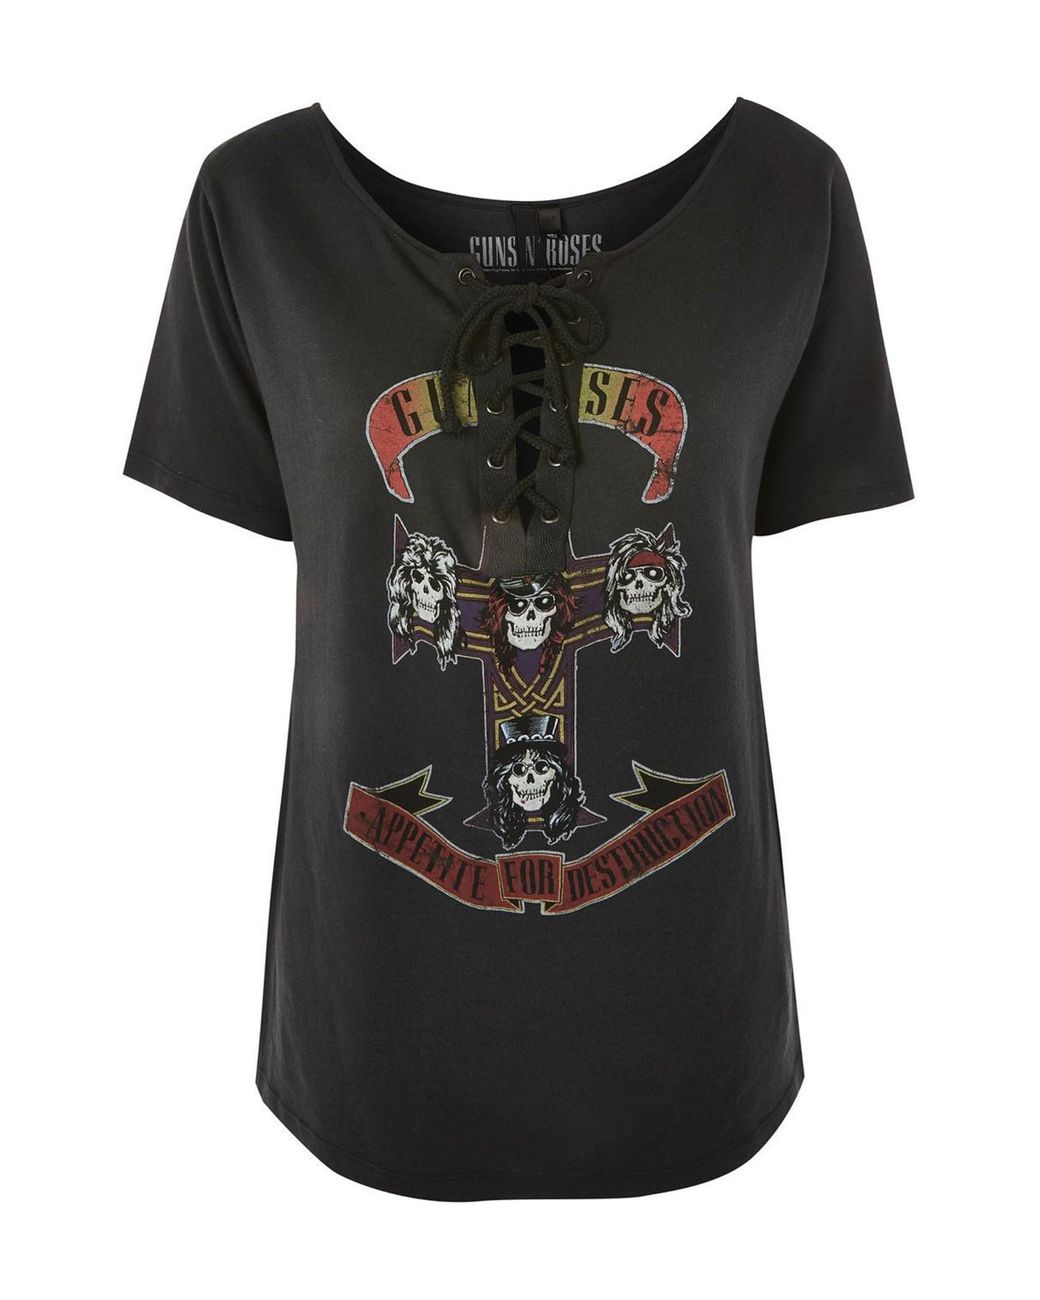 TOPSHOP By And Finally Guns N' Roses Graphic Lace-up Tee in Black | Lyst